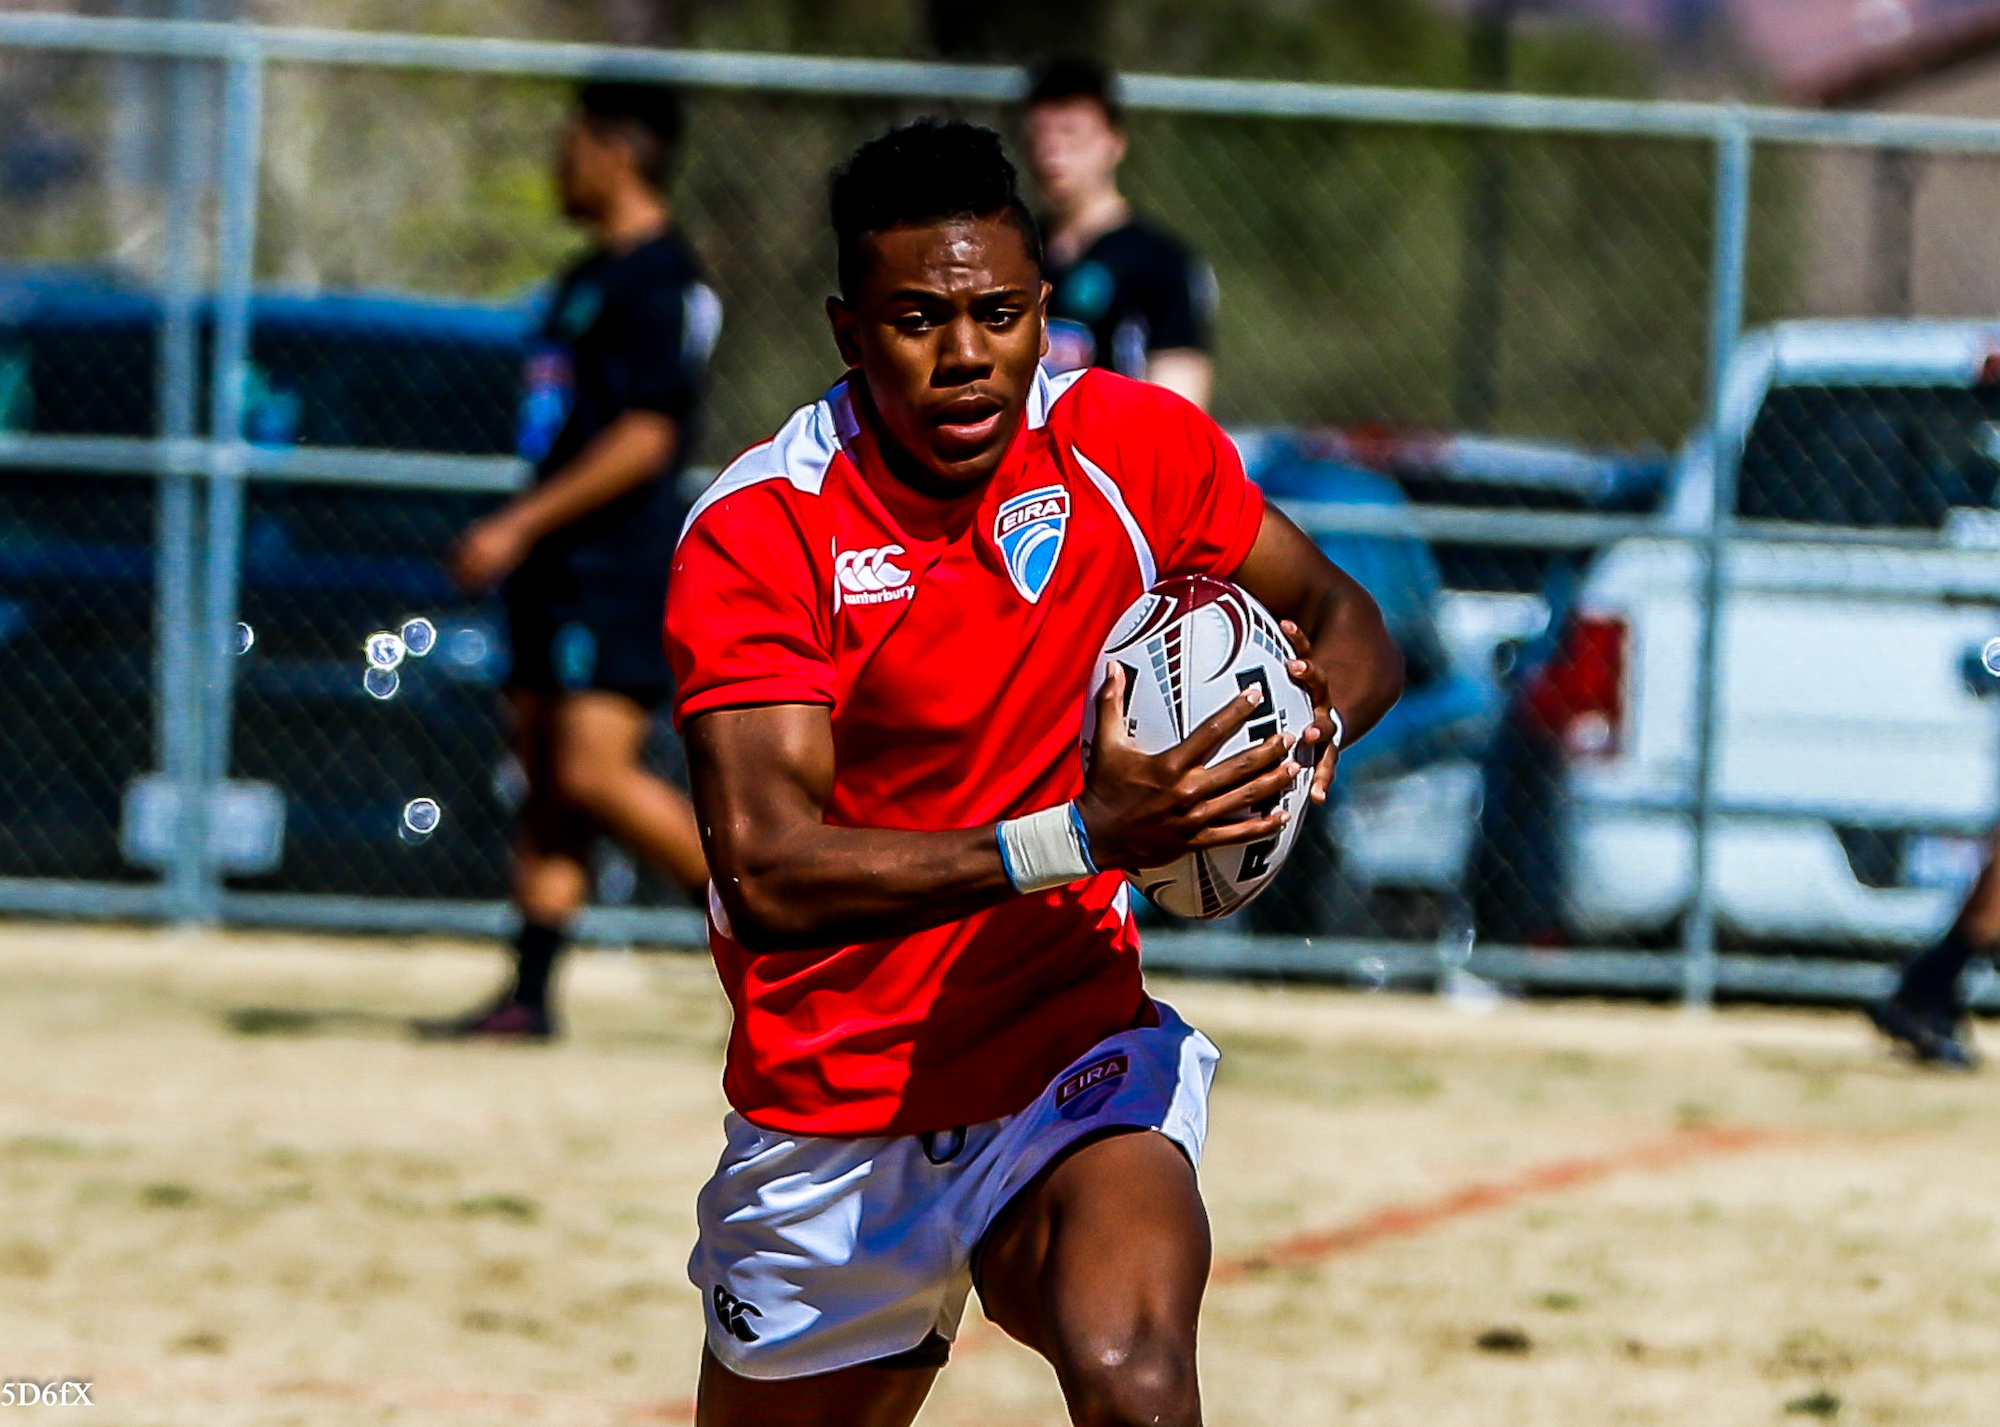 Ryan James in action for Eagle Impact Rugby Academy. Dan Bandoni photo.